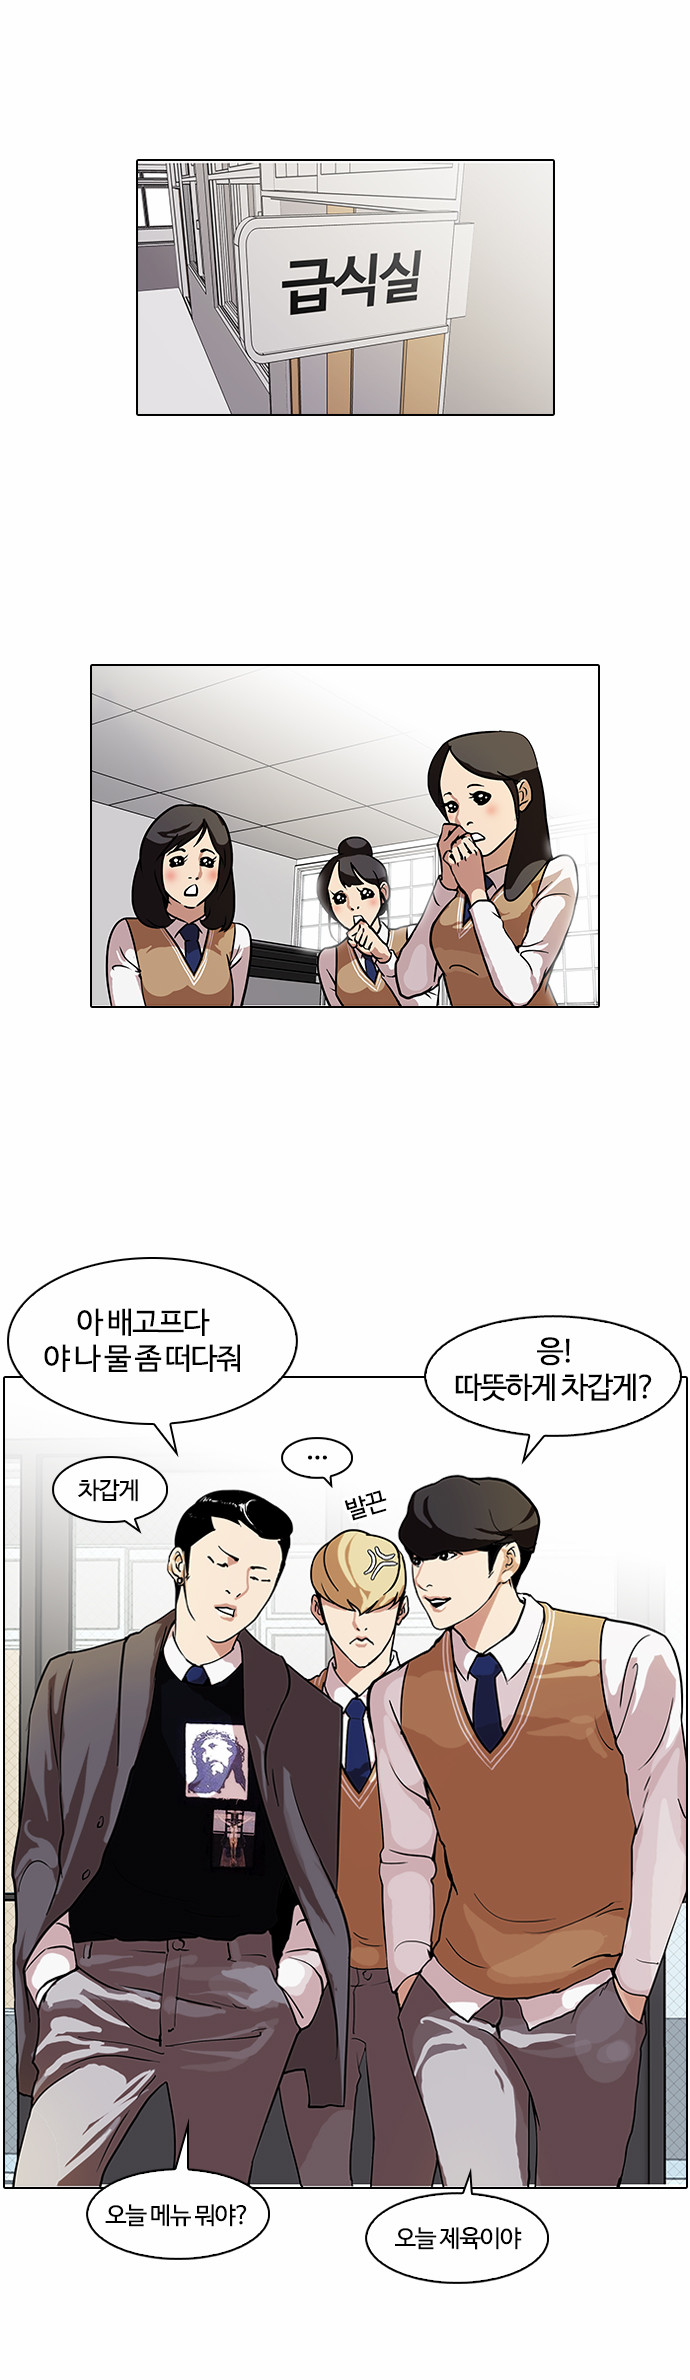 Lookism - Chapter 71 - Page 1